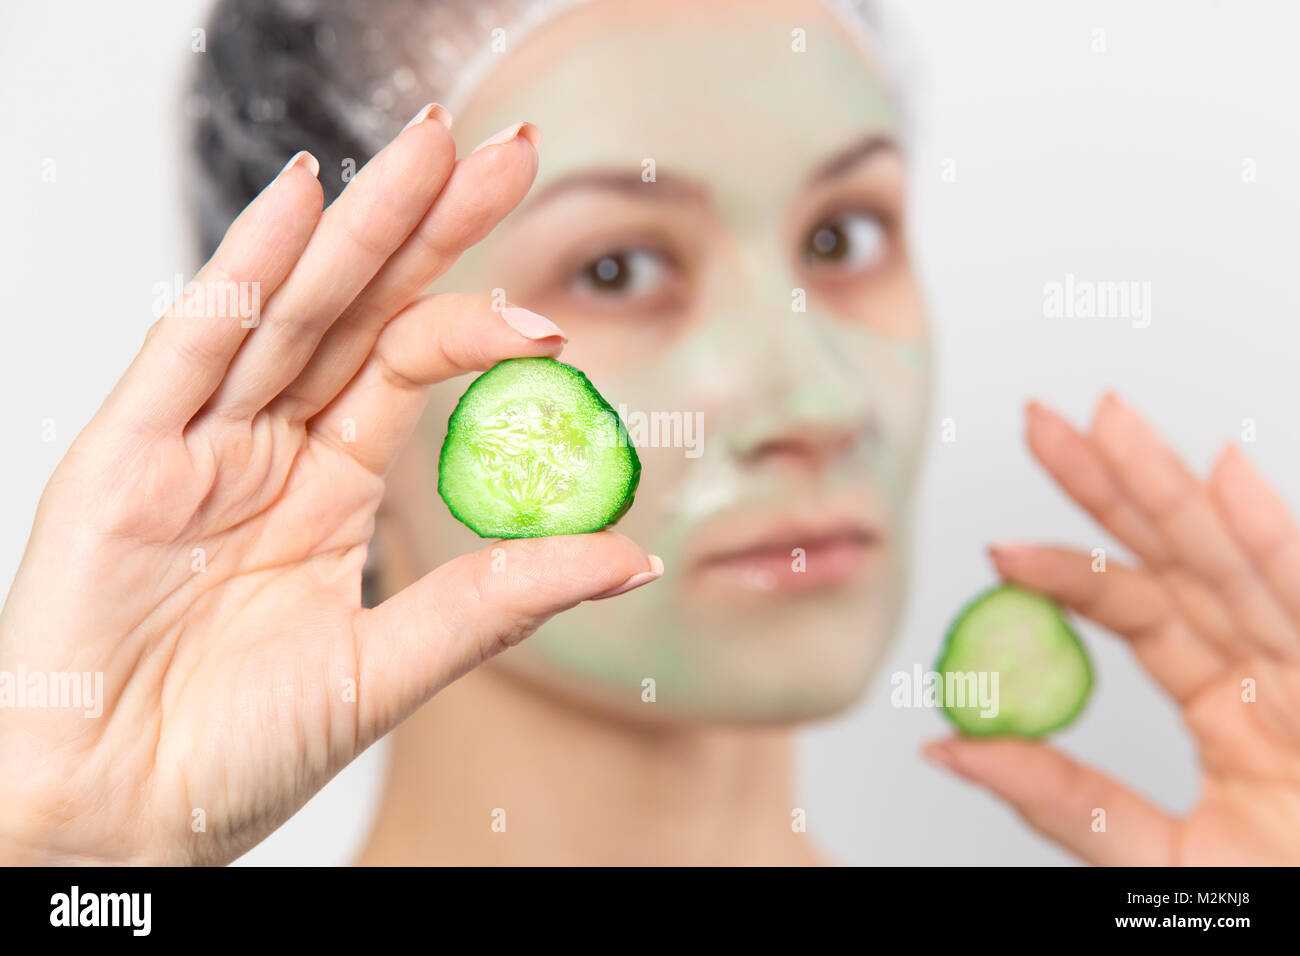 Woman with green cucumber mask on face holding round slices of cucumber. Facial skin care with natural mask. Healthy lifestyle background. Stock Photo